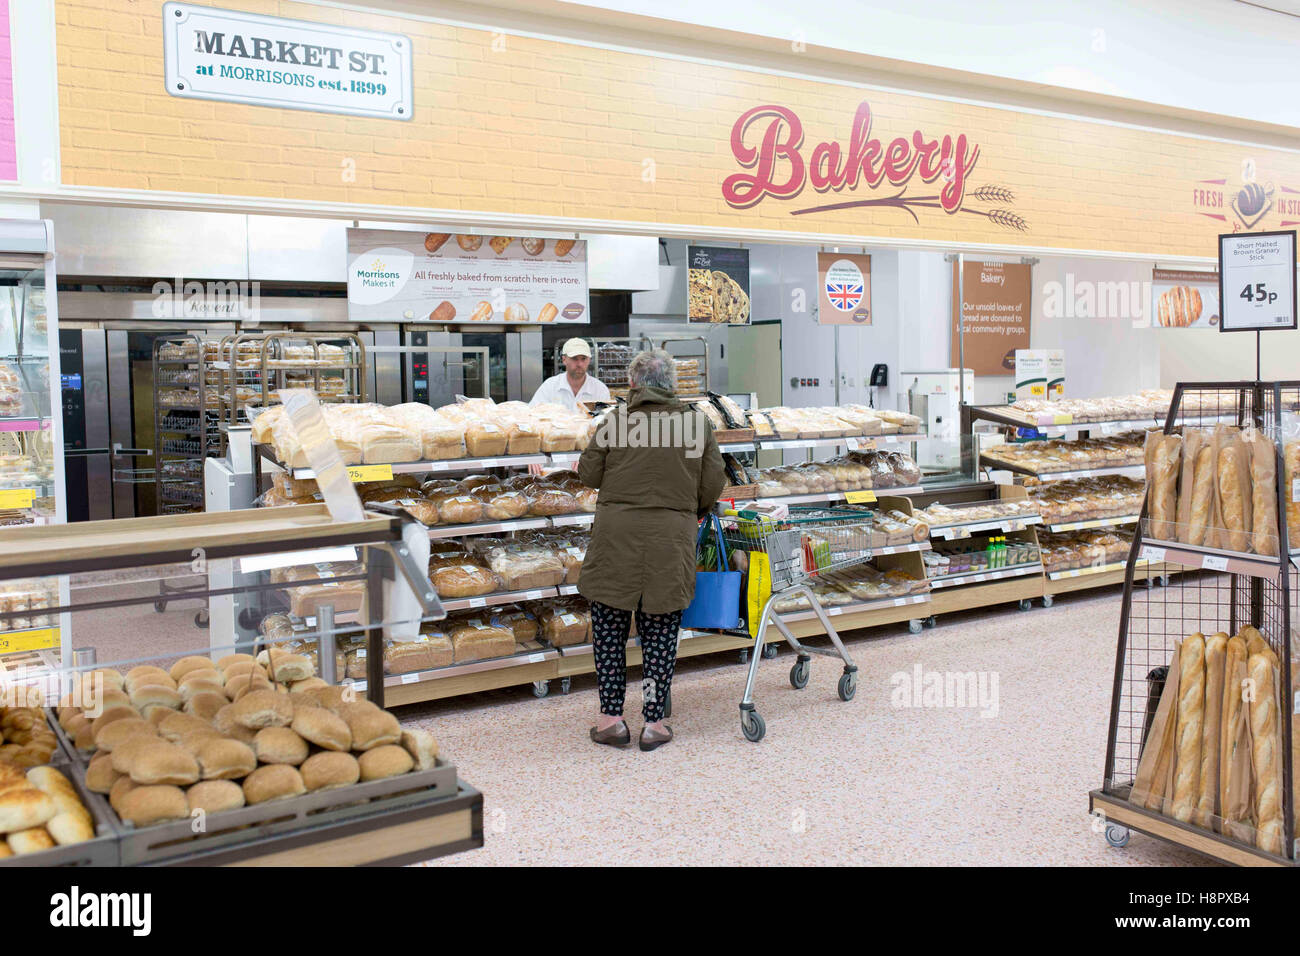 Interior of a Morrisons supermarket. Bakery Stock Photo